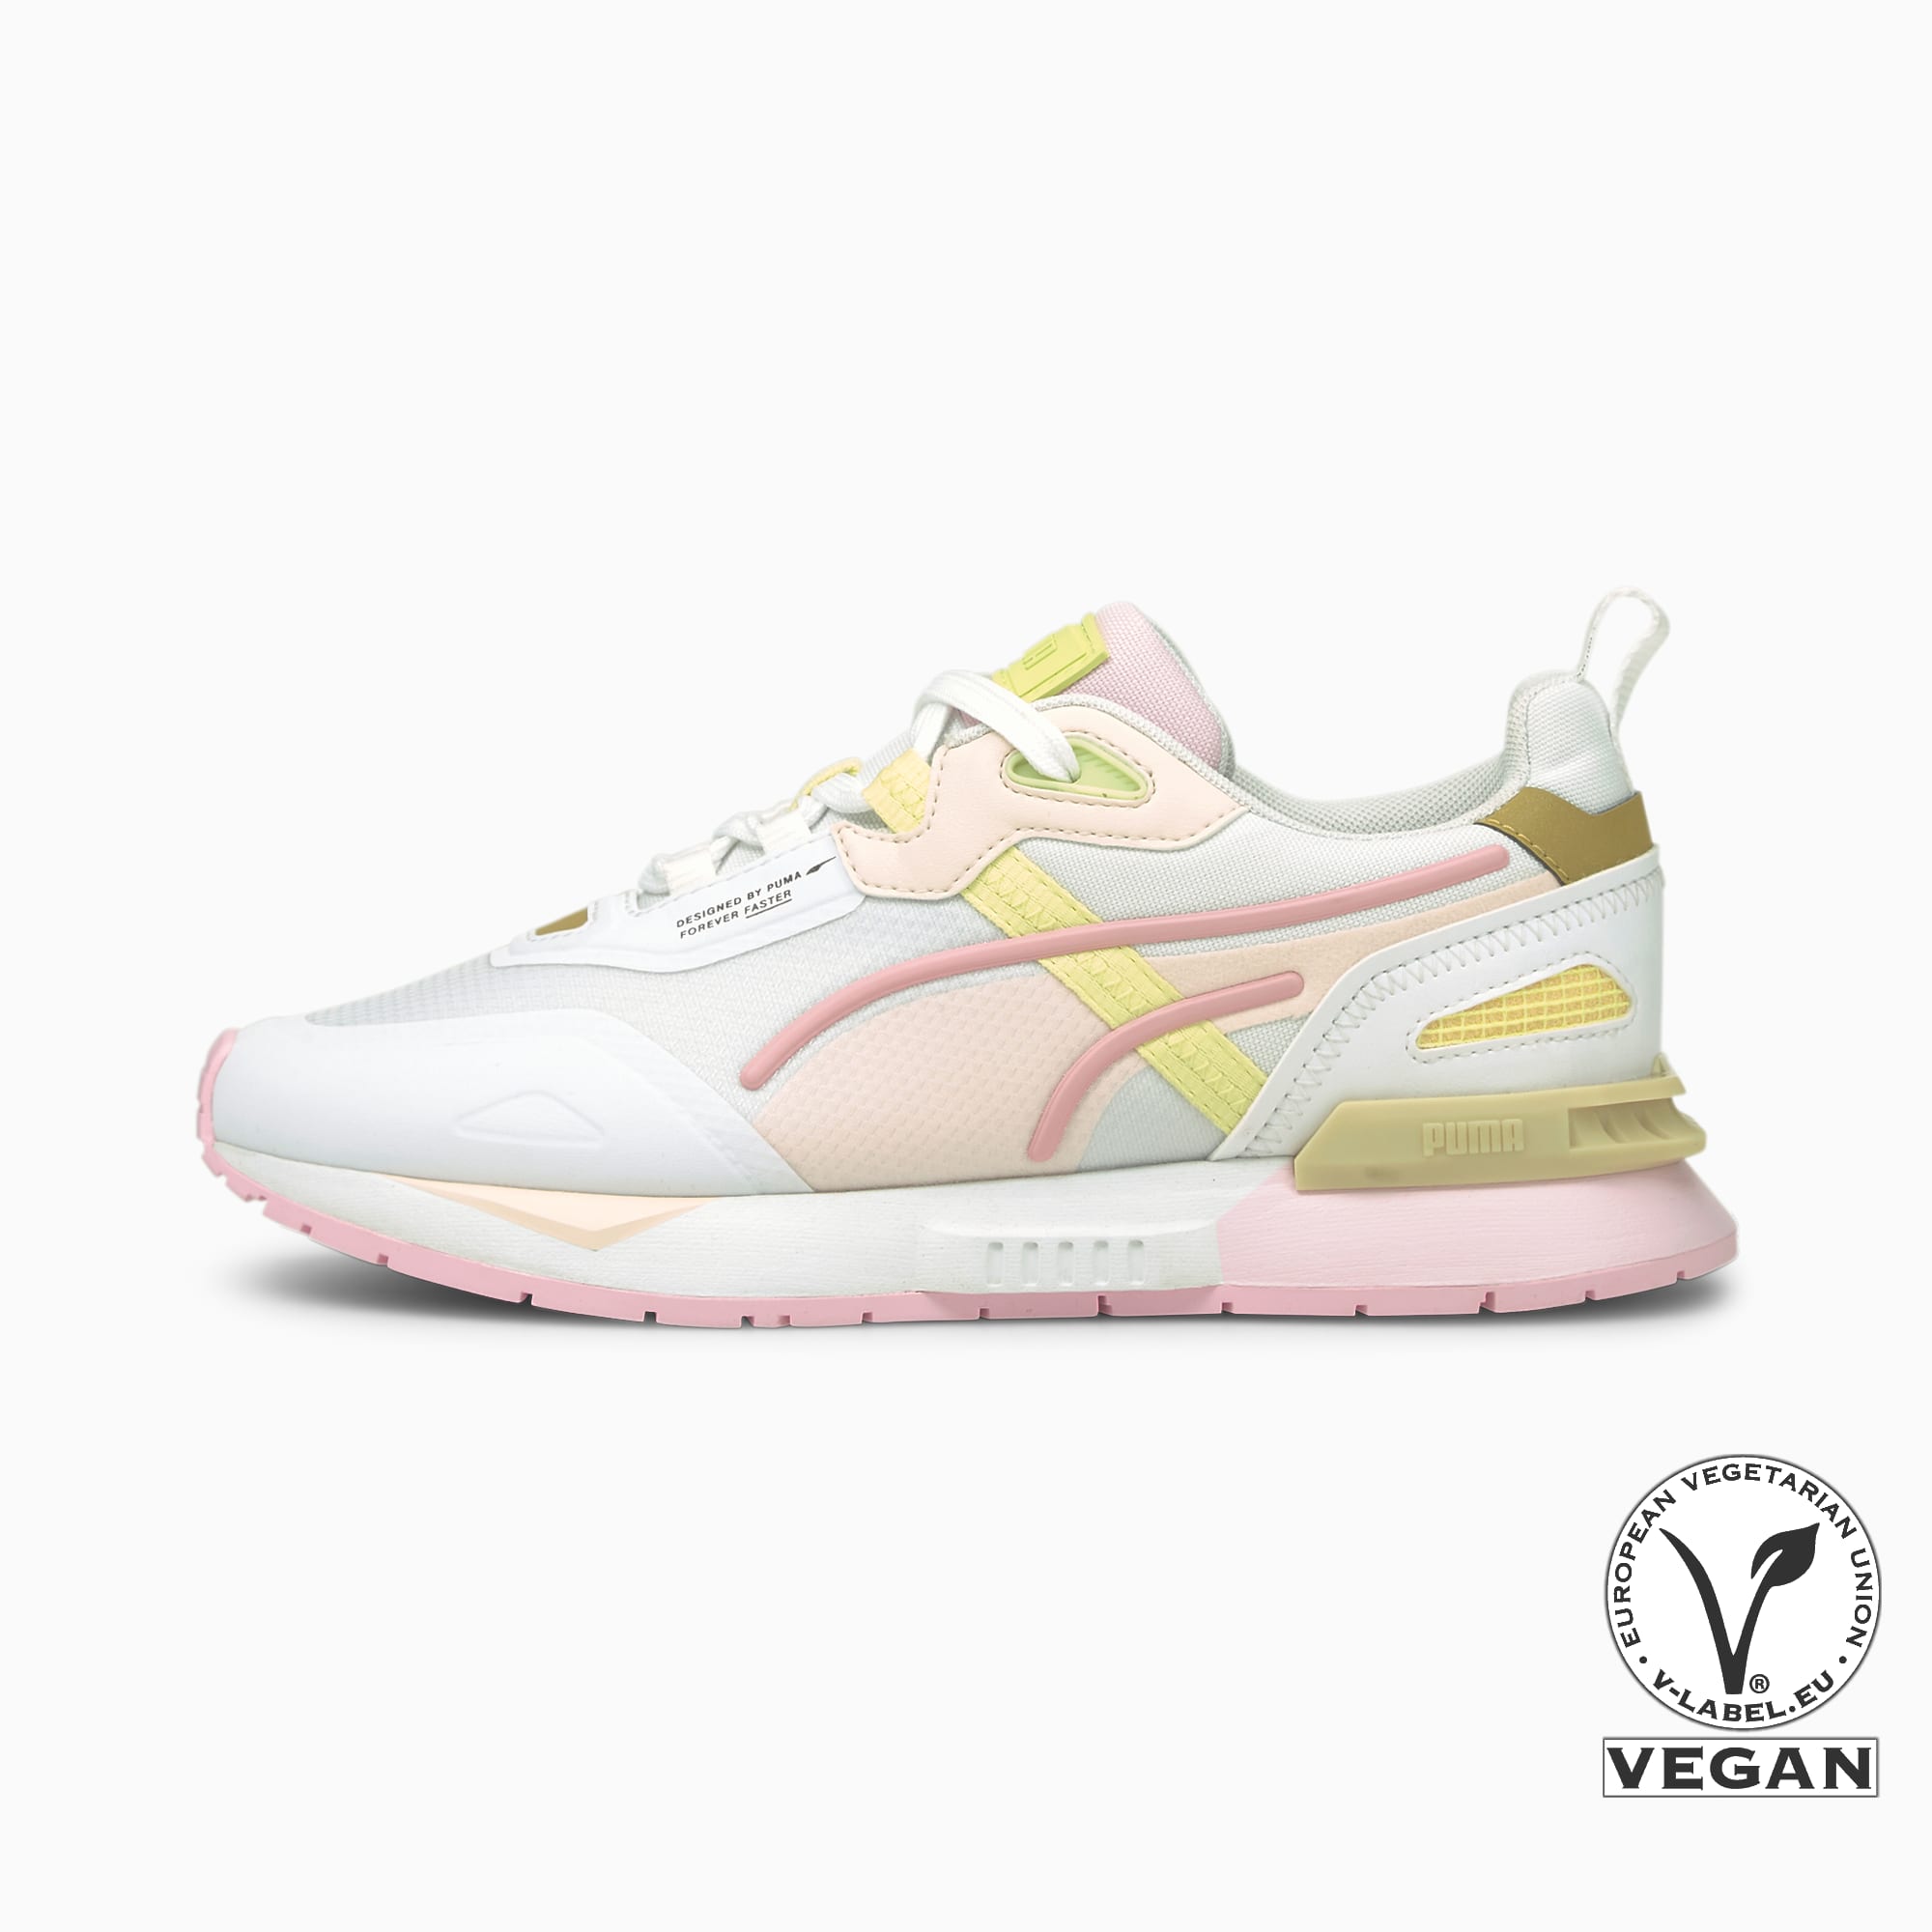 PUMA Chaussure Baskets Mirage Tech, Or/Rose/Blanc, Taille 40, Chaussures